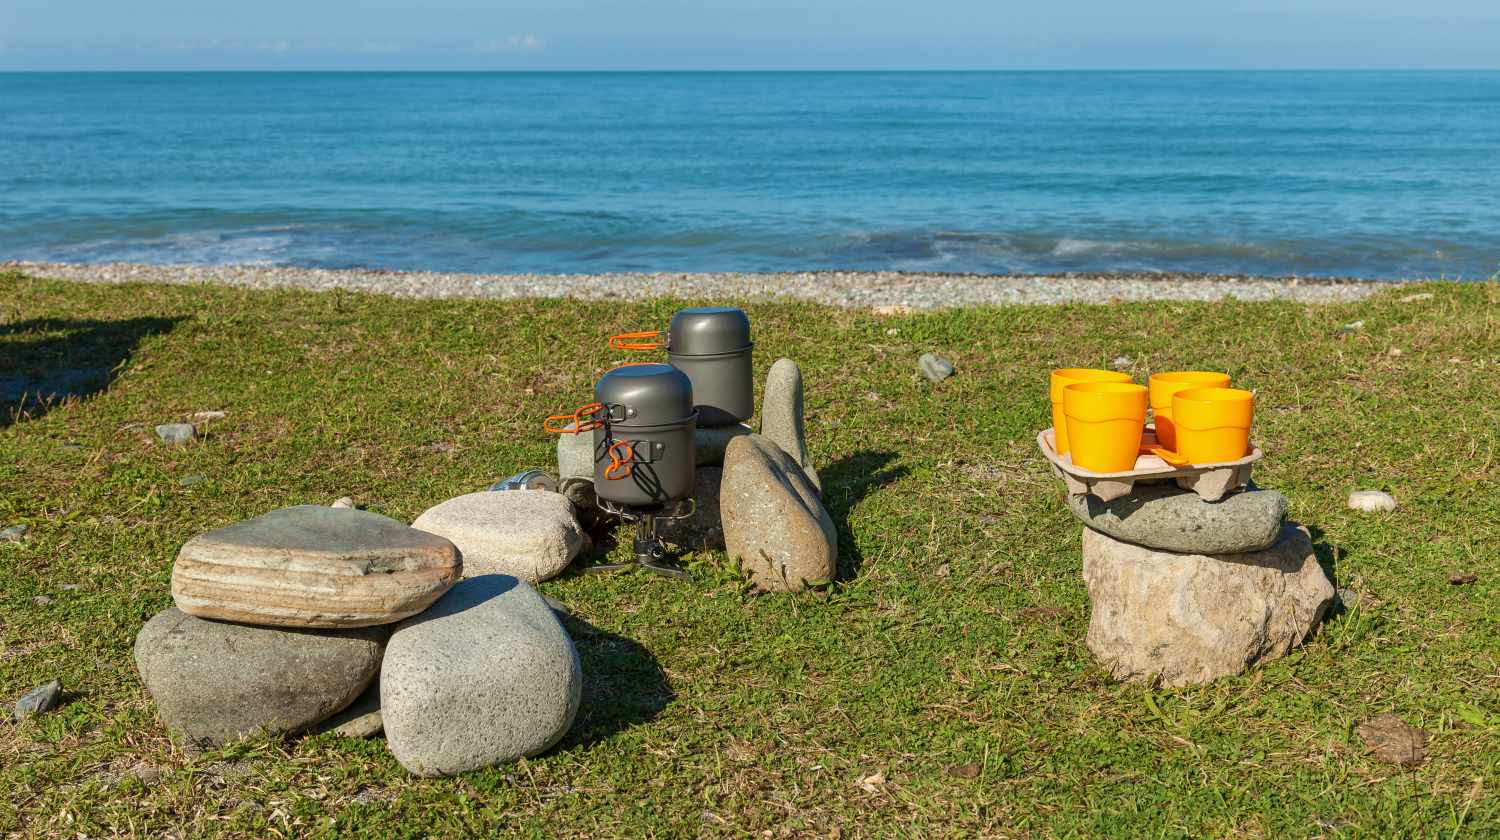 Camping utensils for making coffee and food on a trip | Smart Beach Camping Tips And Tricks | Featured